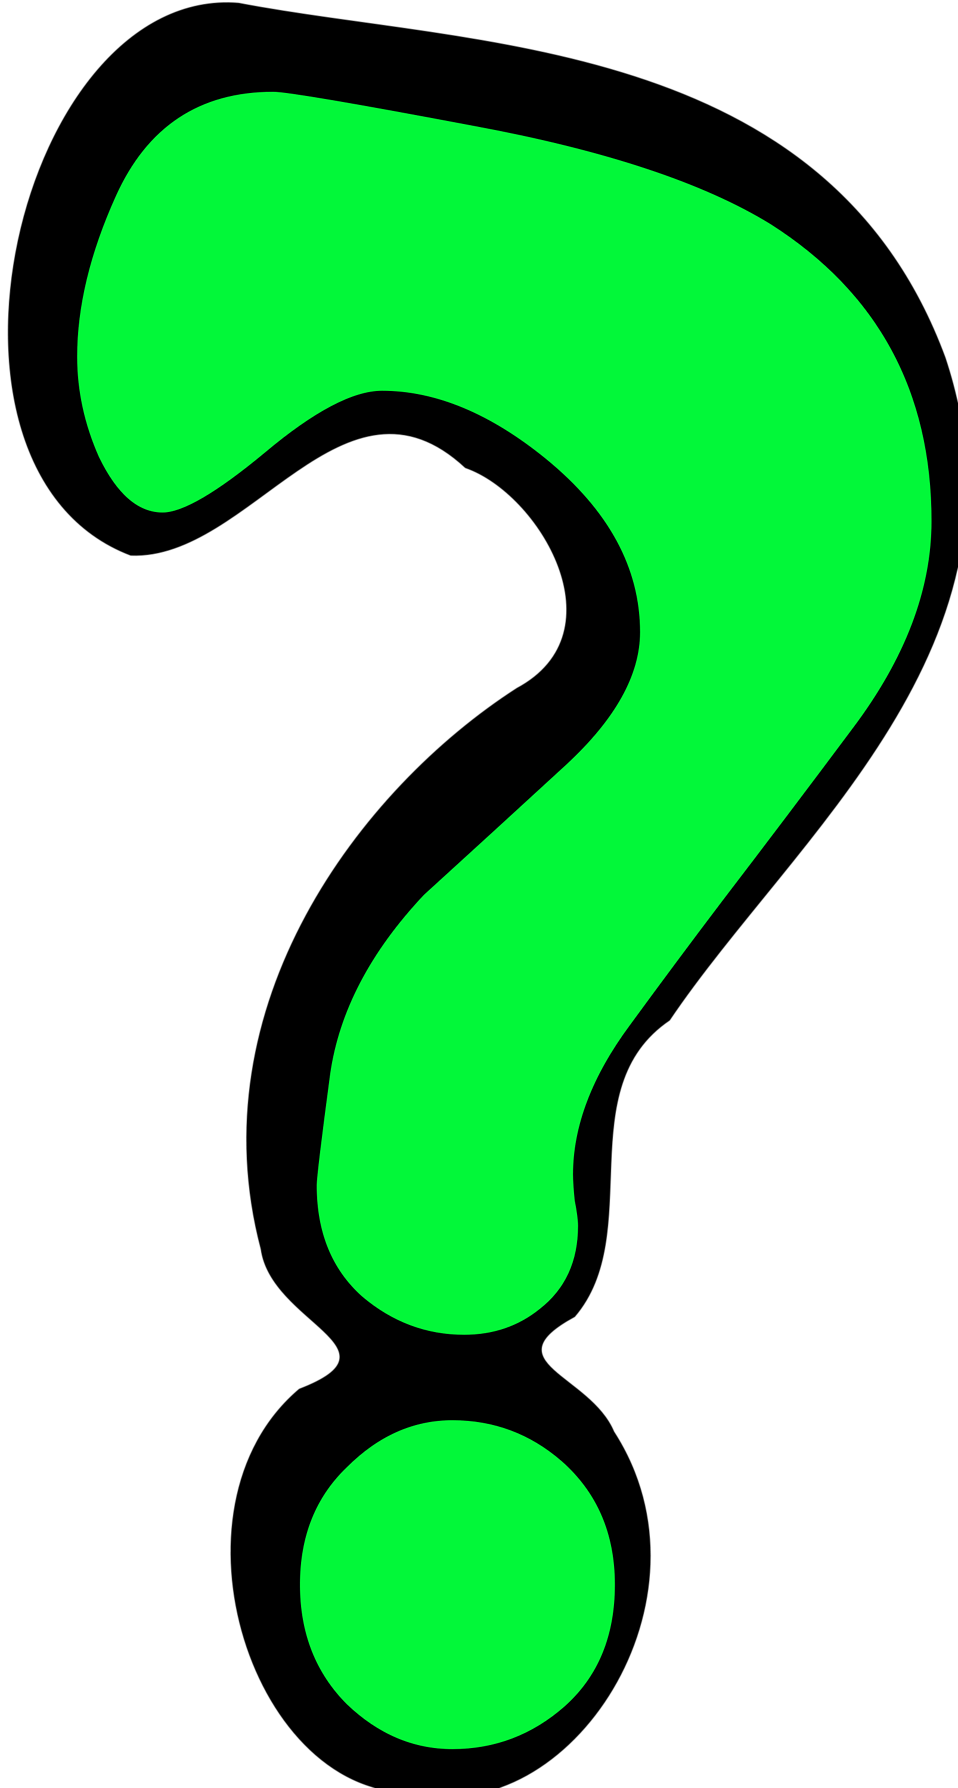 clipart of a question mark - photo #28